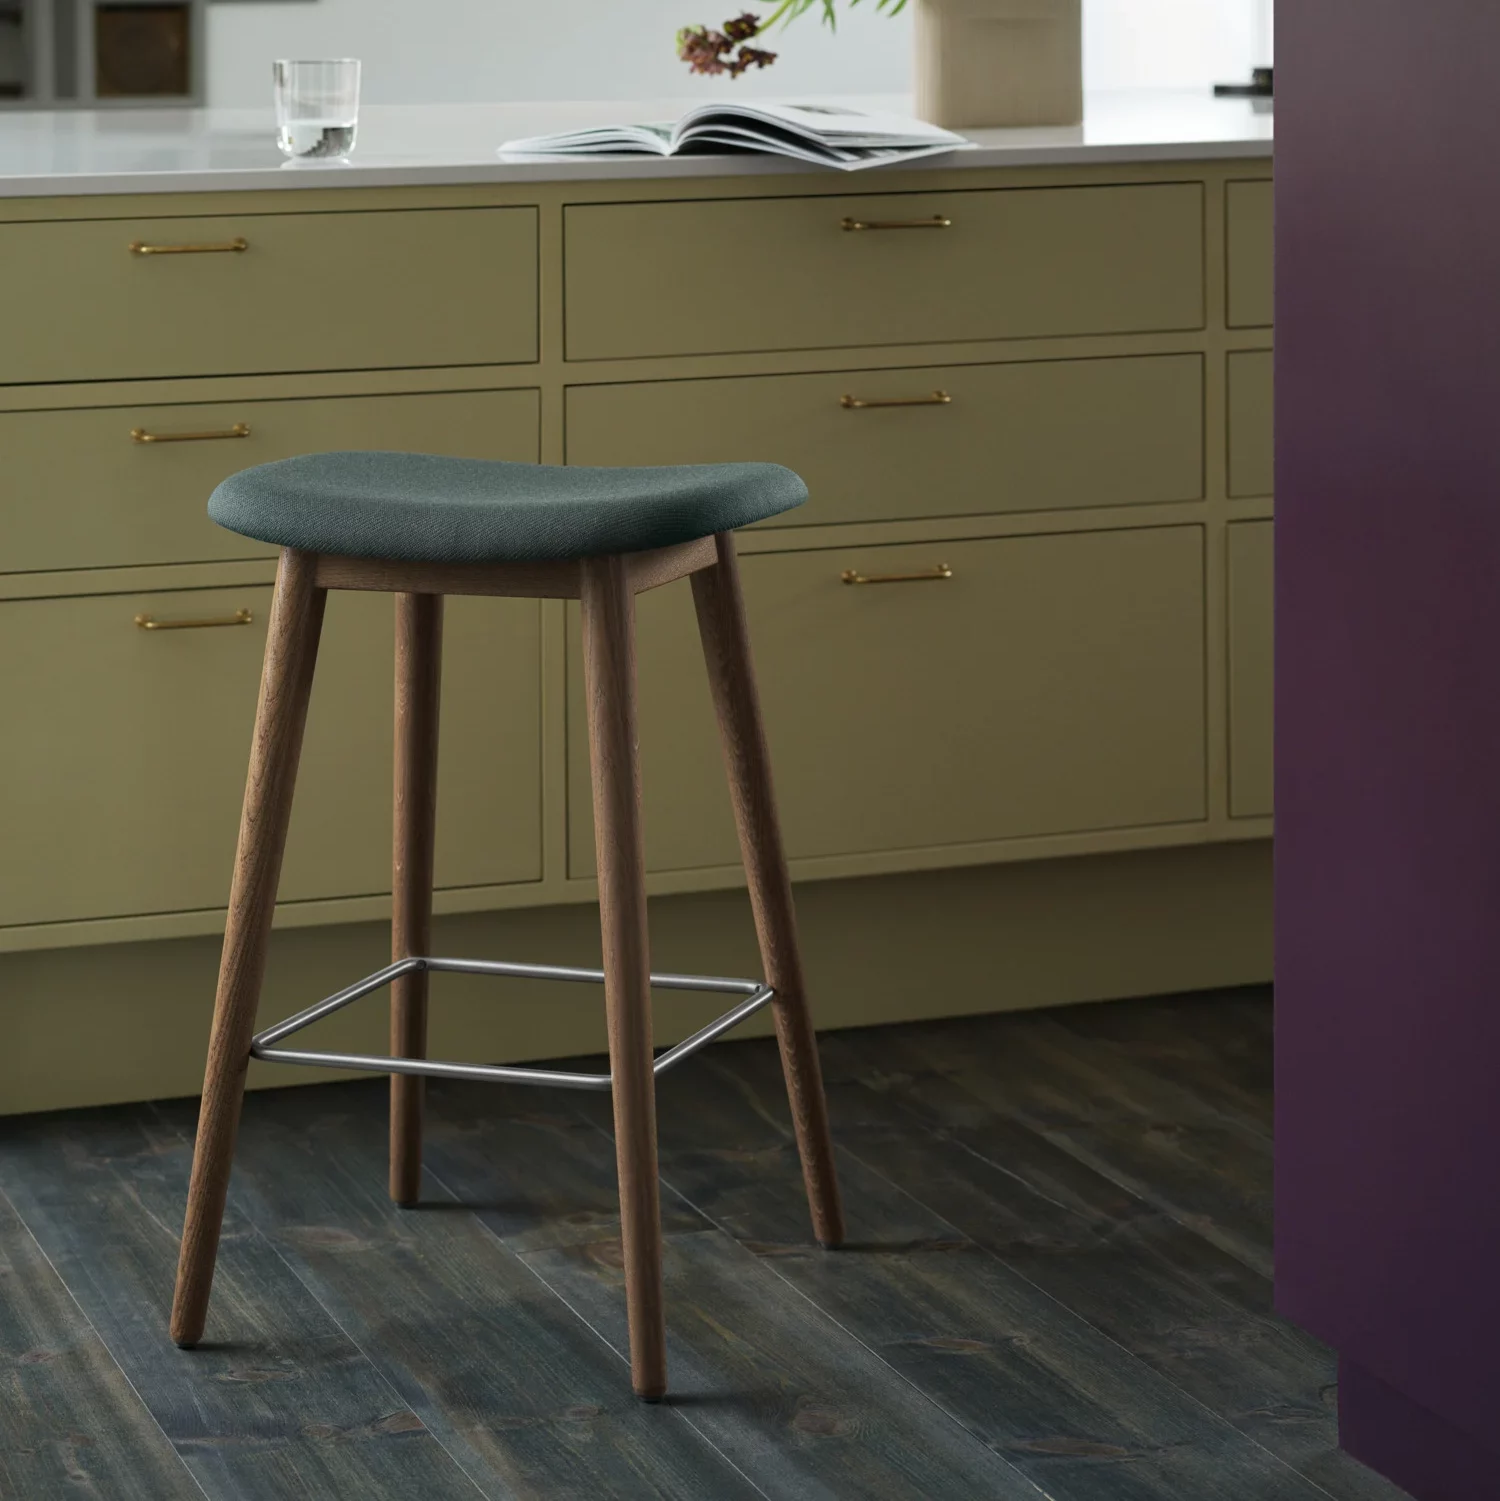 A teal cushioned kitchen stool with wooden leg.